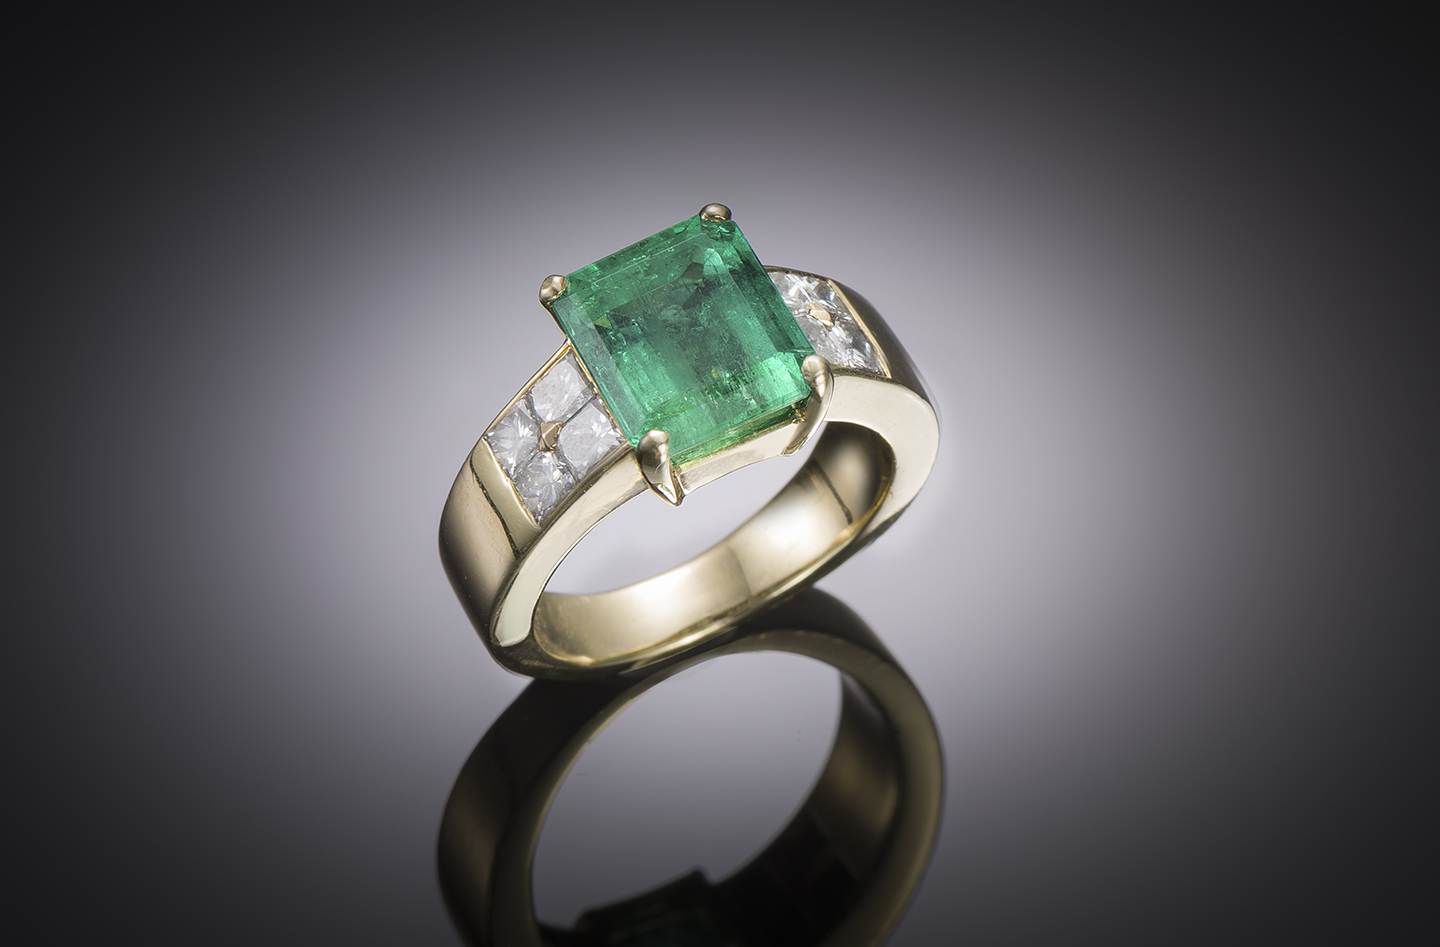 Colombian emerald 4.26 carats (laboratory certificate) and diamond ring-1